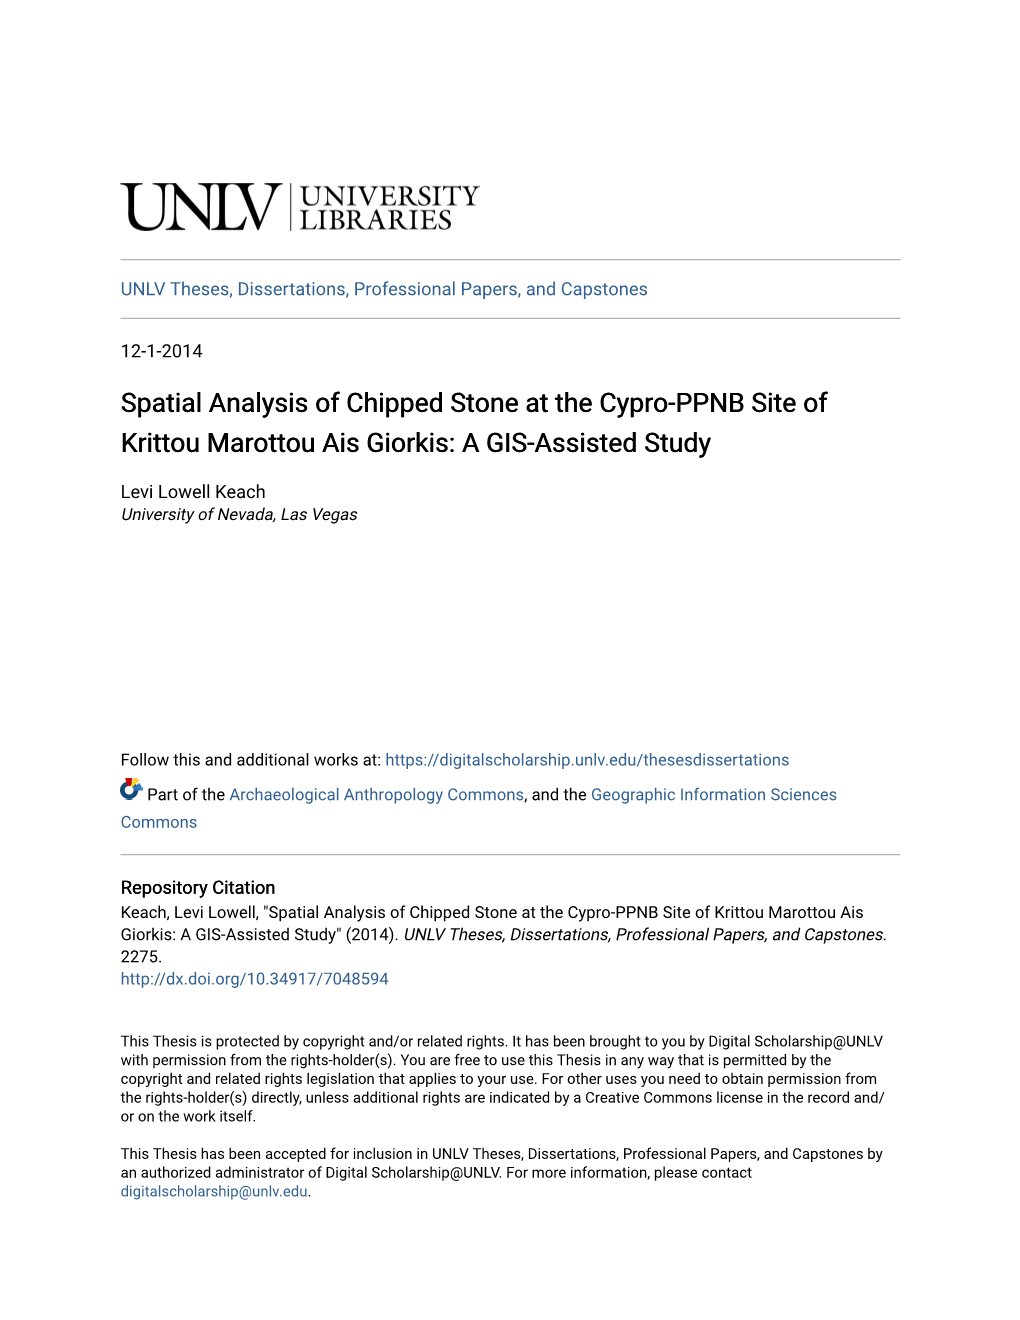 Spatial Analysis of Chipped Stone at the Cypro-PPNB Site of Krittou Marottou Ais Giorkis: a GIS-Assisted Study